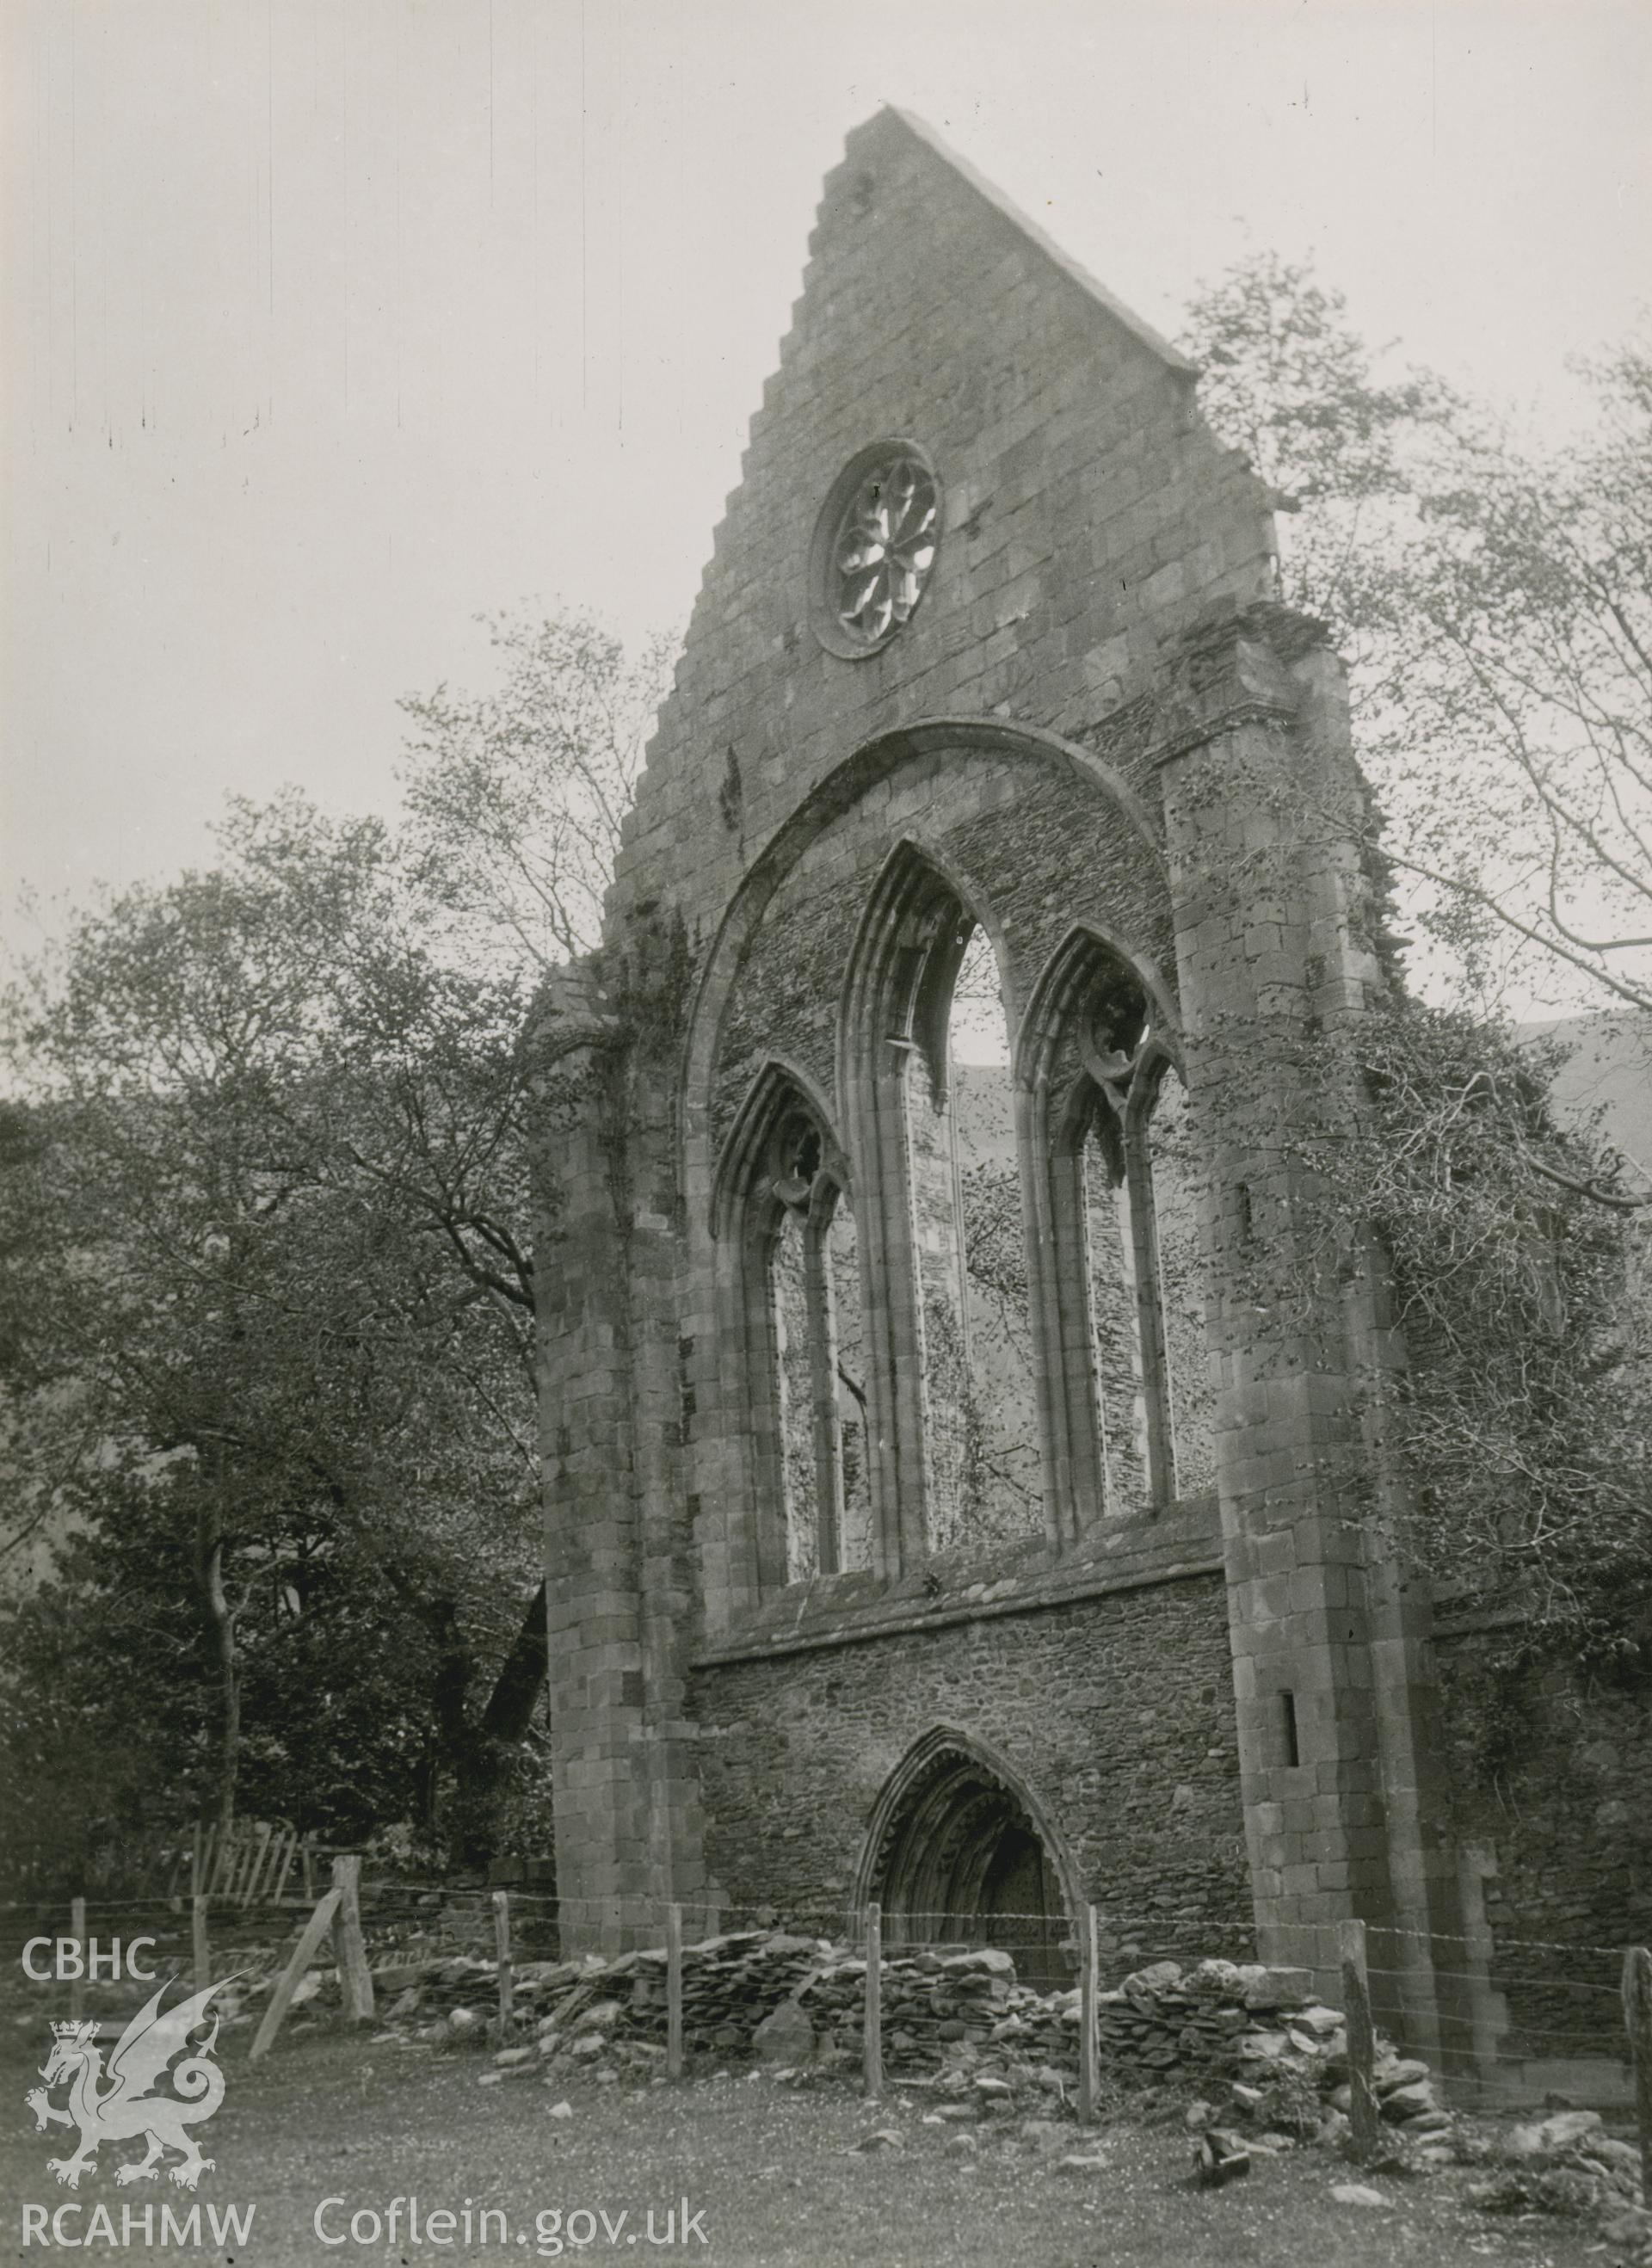 Digitised copy of a c.1946 view of Valle Crucis Abbey taken by Angela Green, from the National Buildings Record.